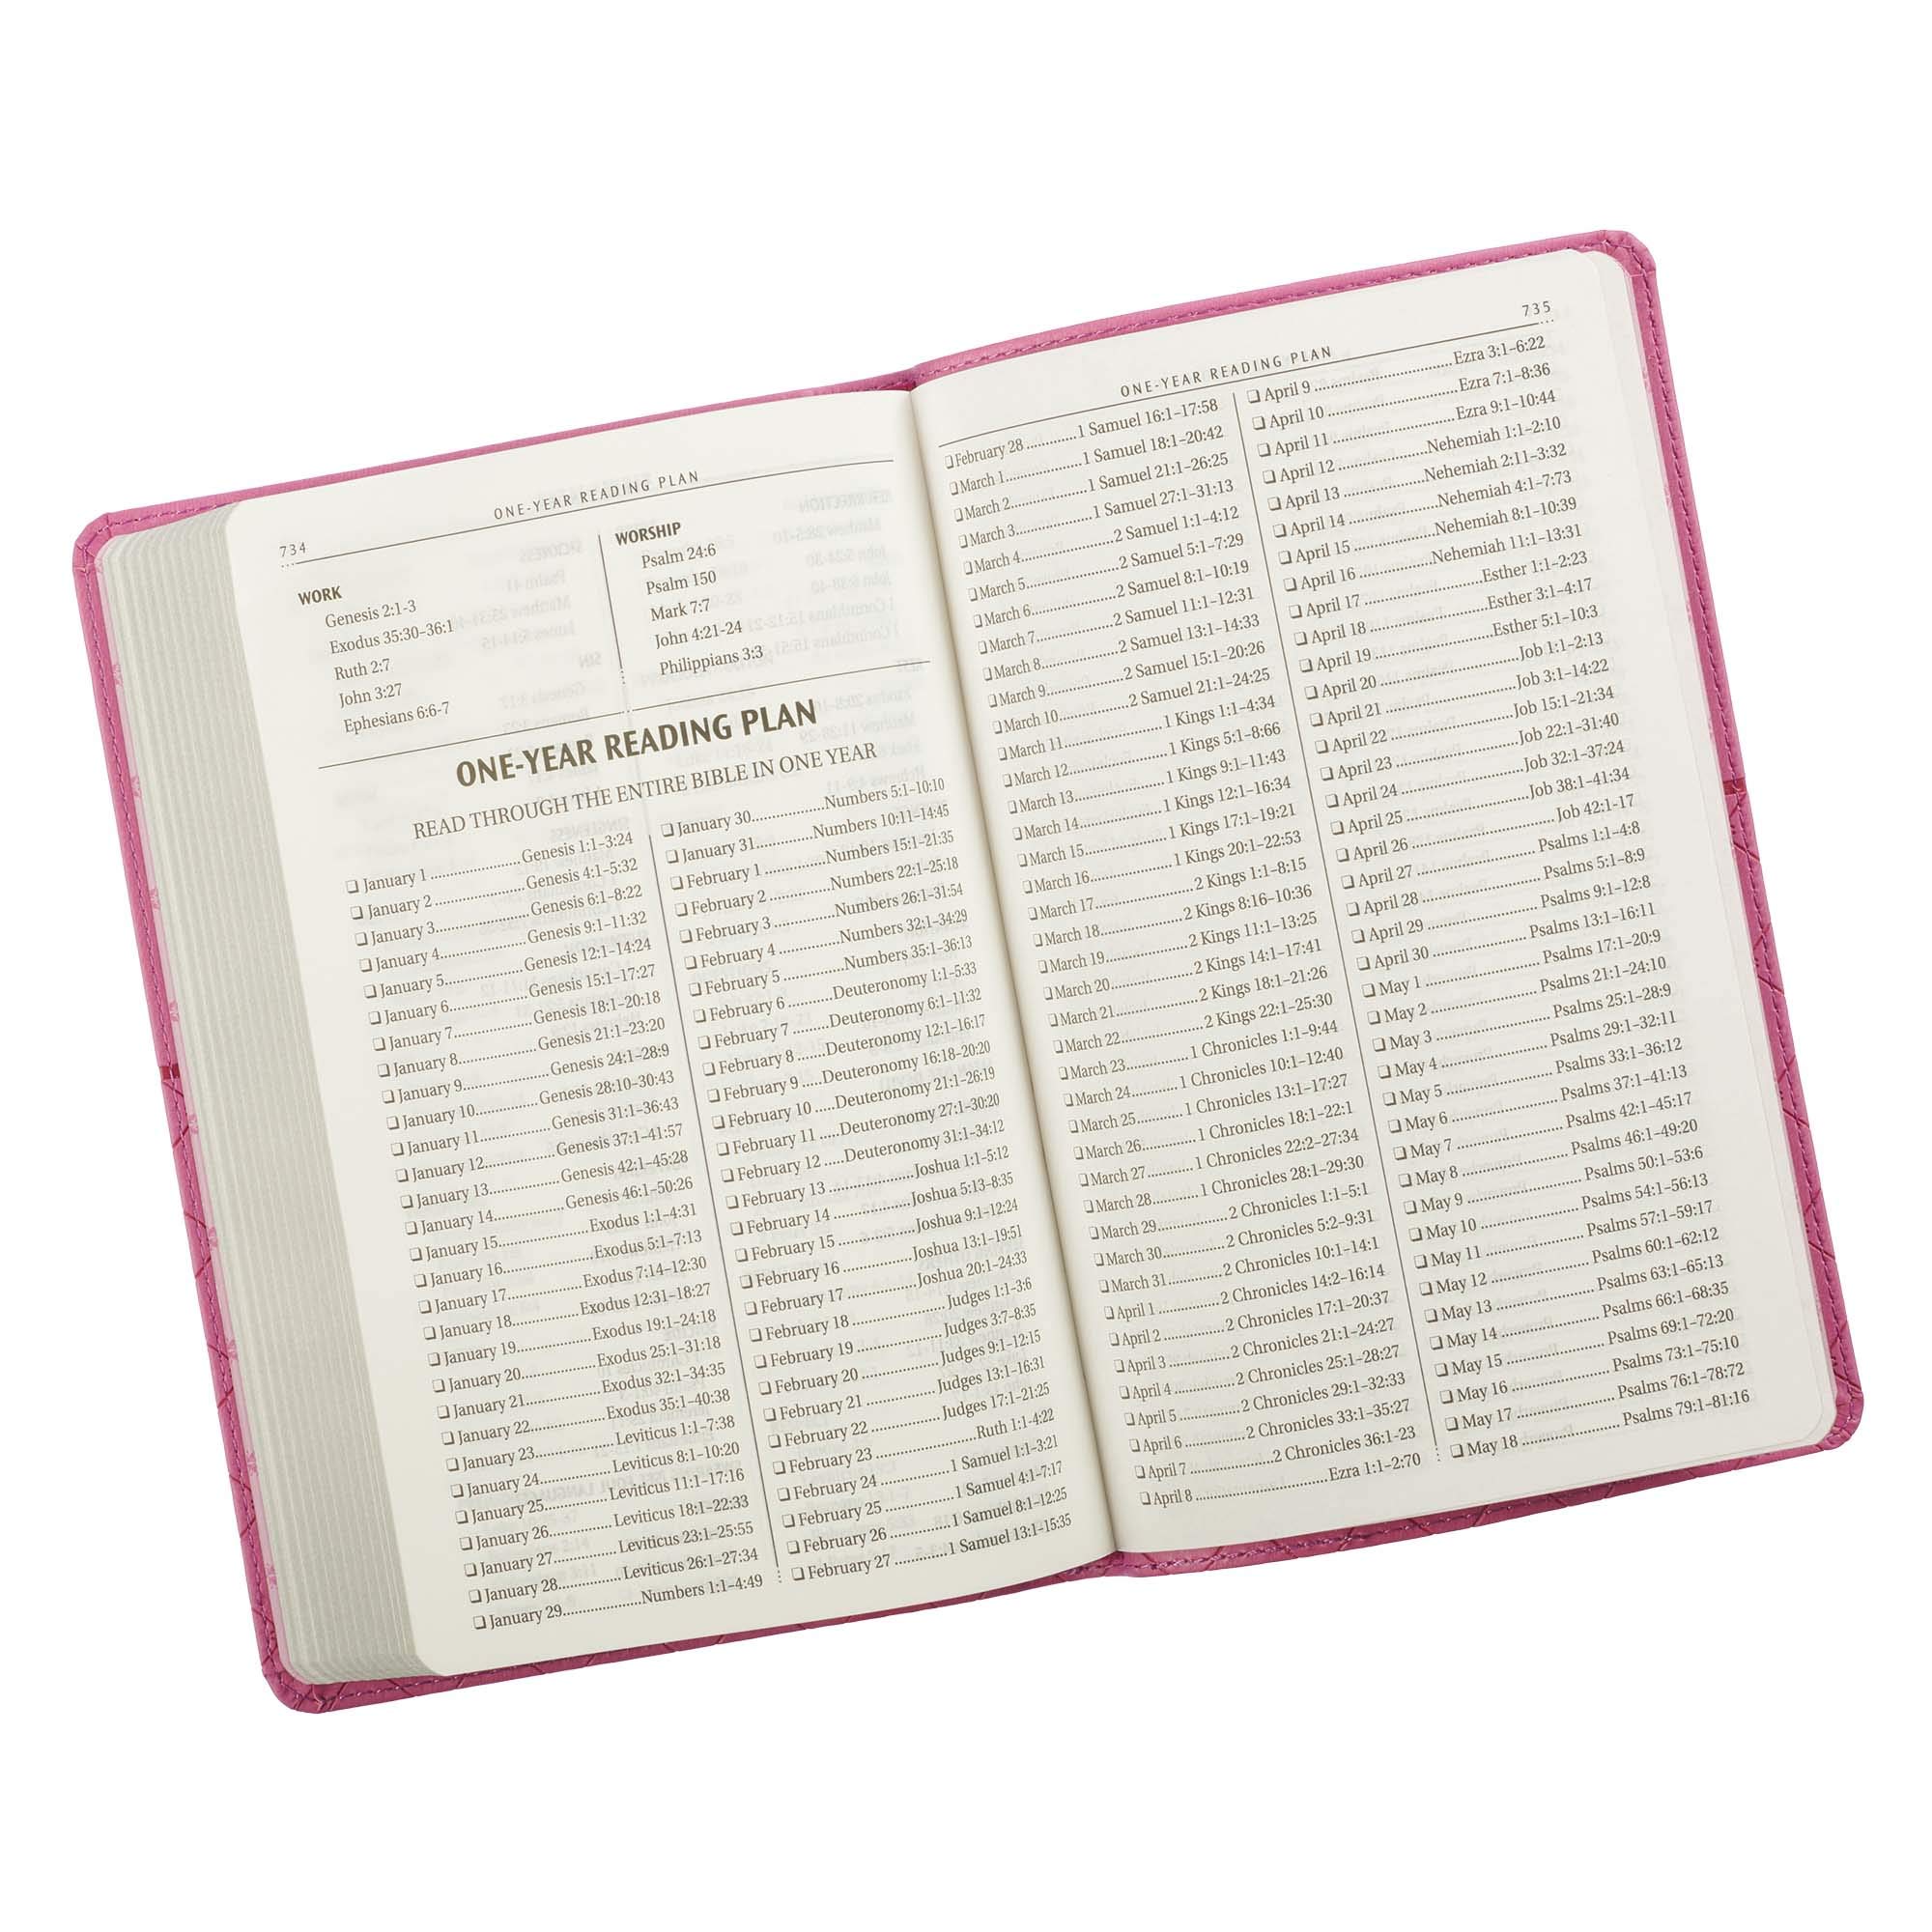 KJV Holy Bible, Gift Edition Faux Leather, King James Version, Pink